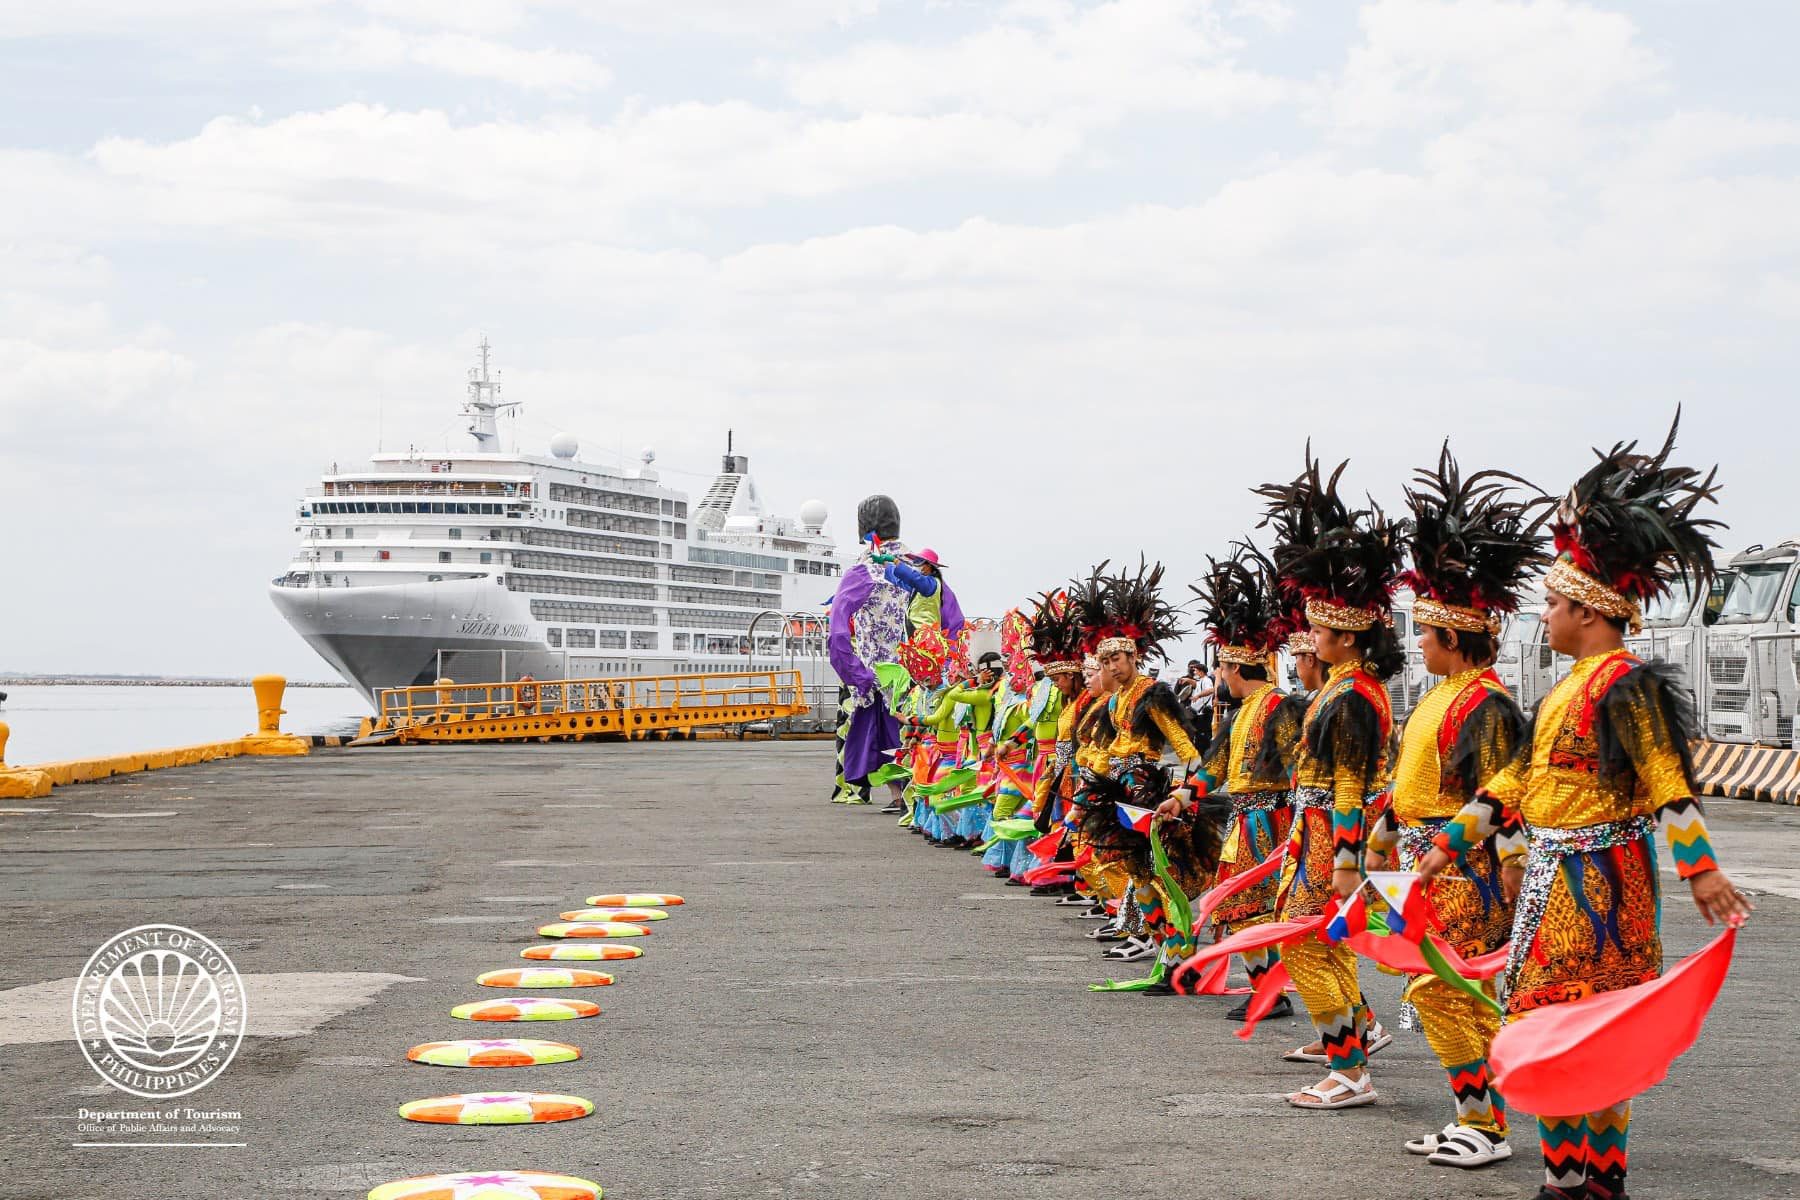 Philippines hopes to become Asia ‘cruise hub’ in tourism ramp-up